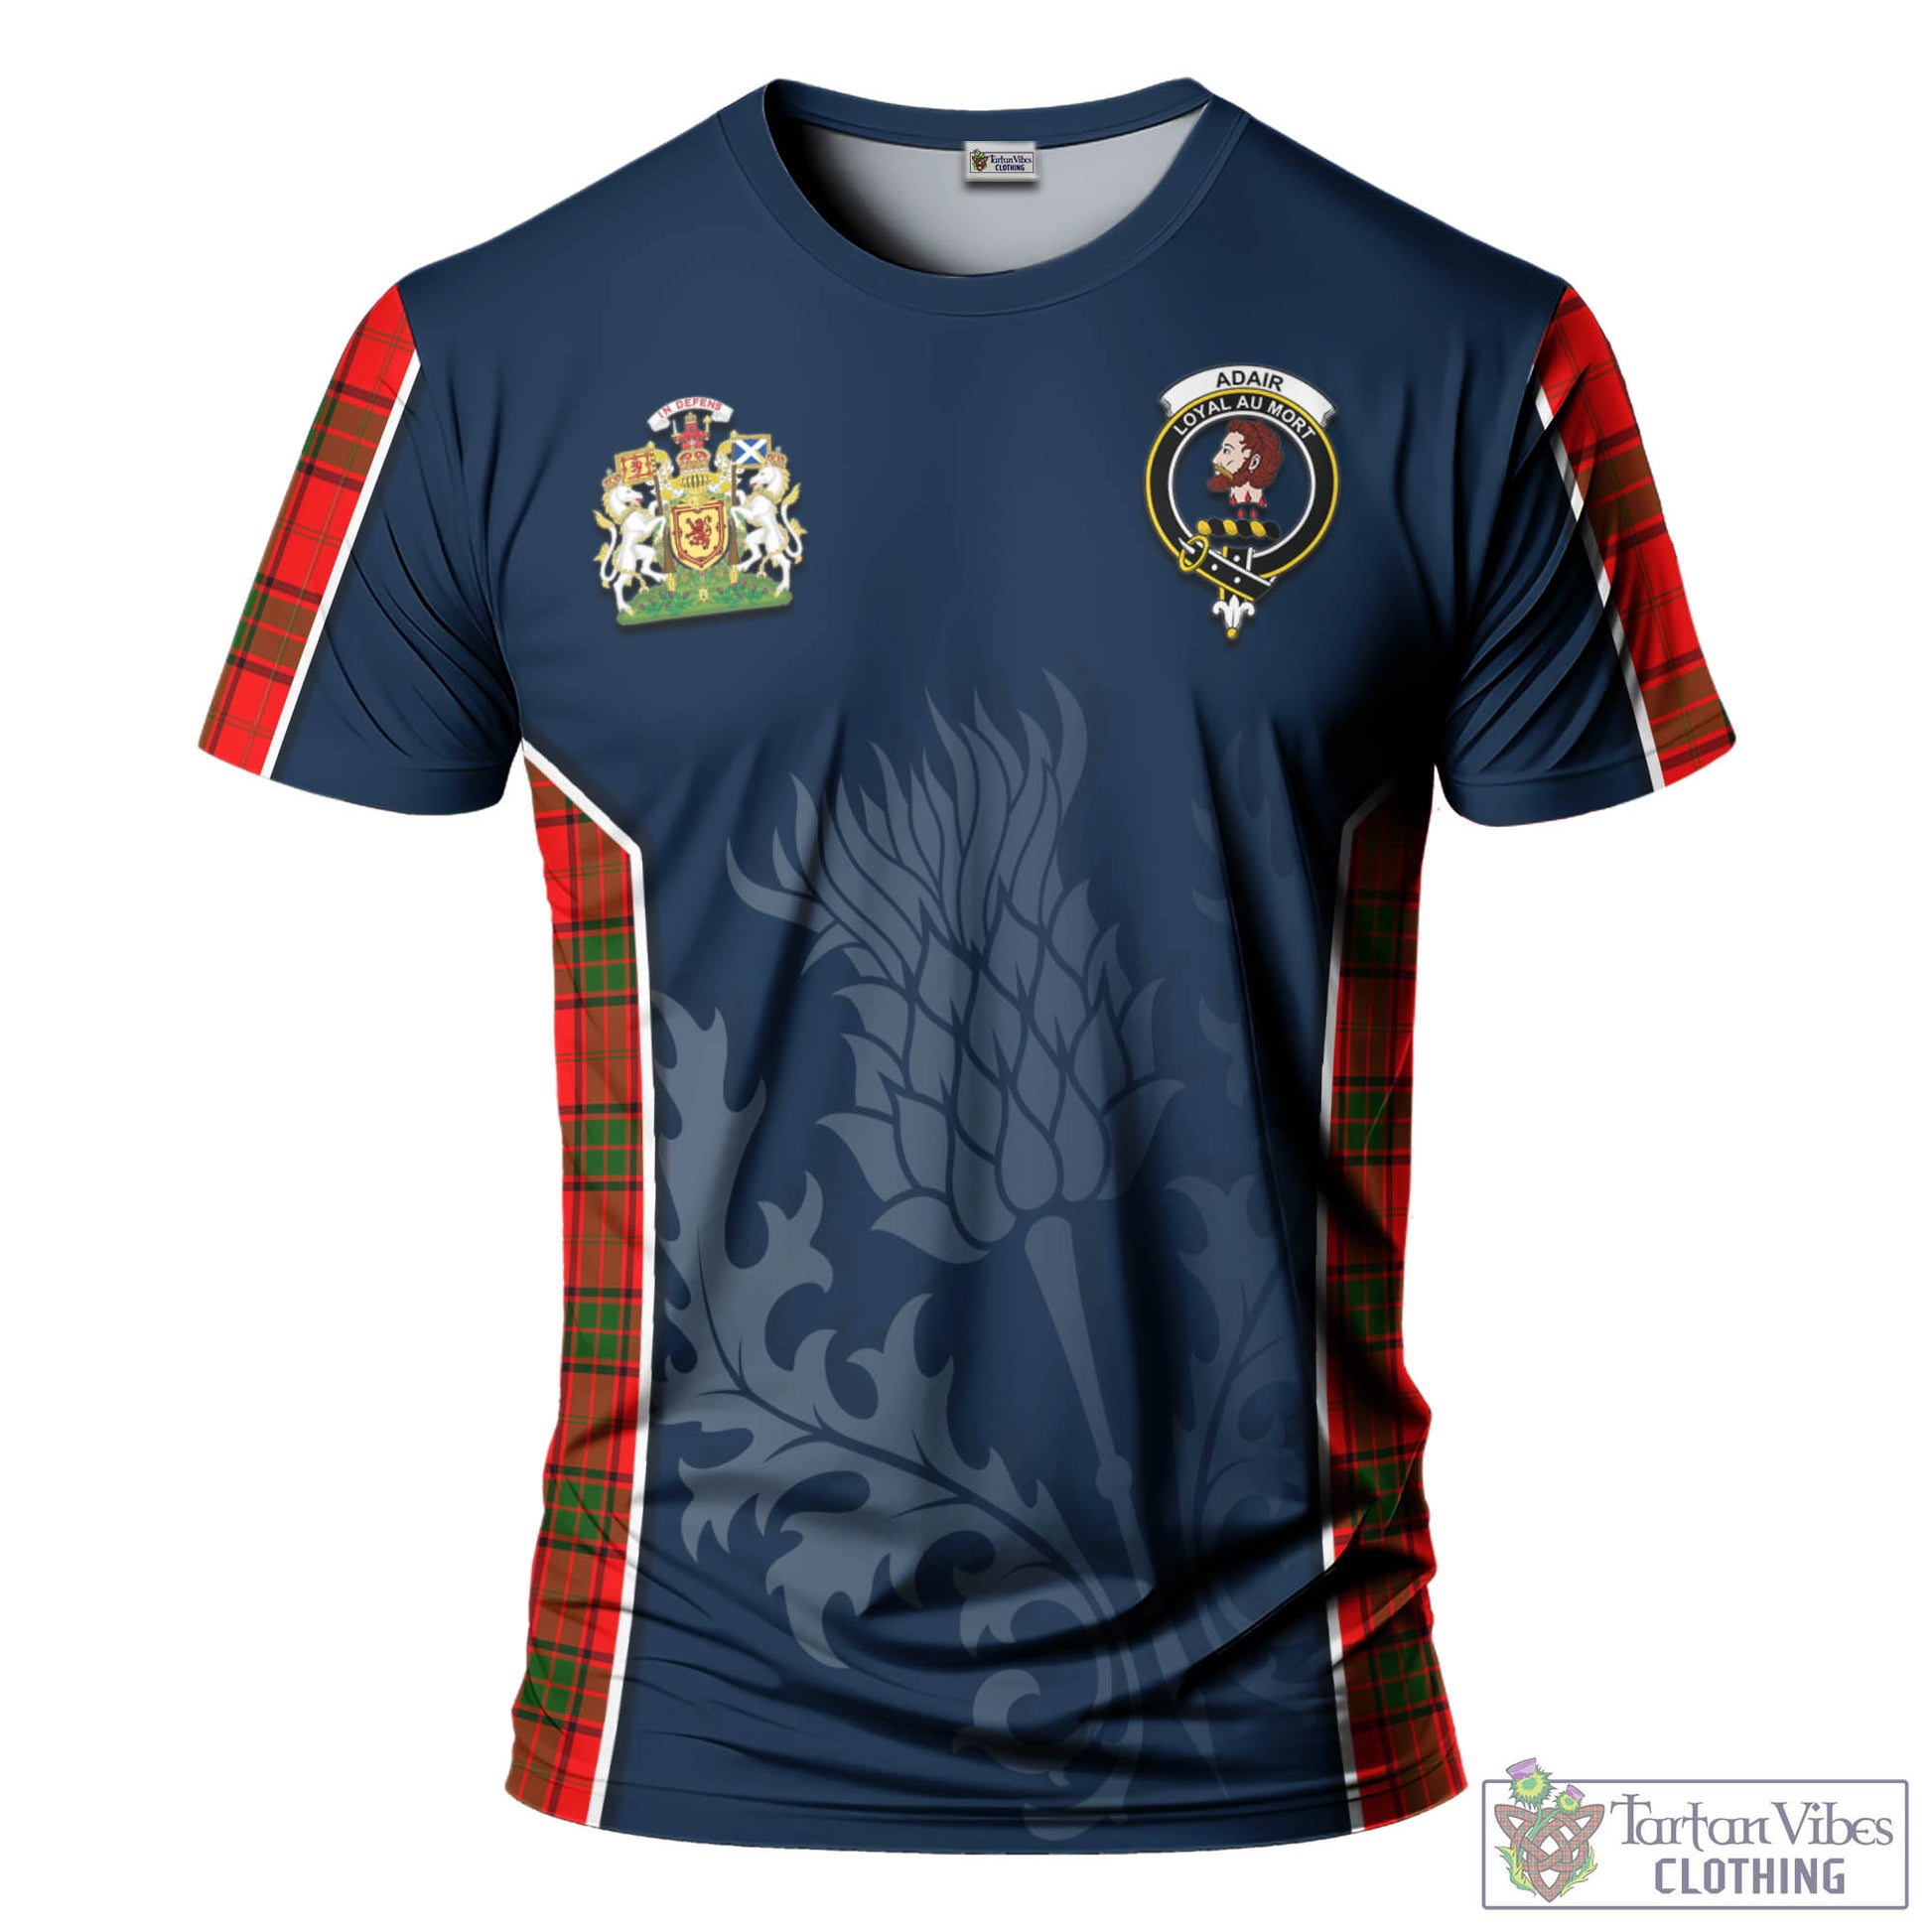 Tartan Vibes Clothing Adair Tartan T-Shirt with Family Crest and Scottish Thistle Vibes Sport Style